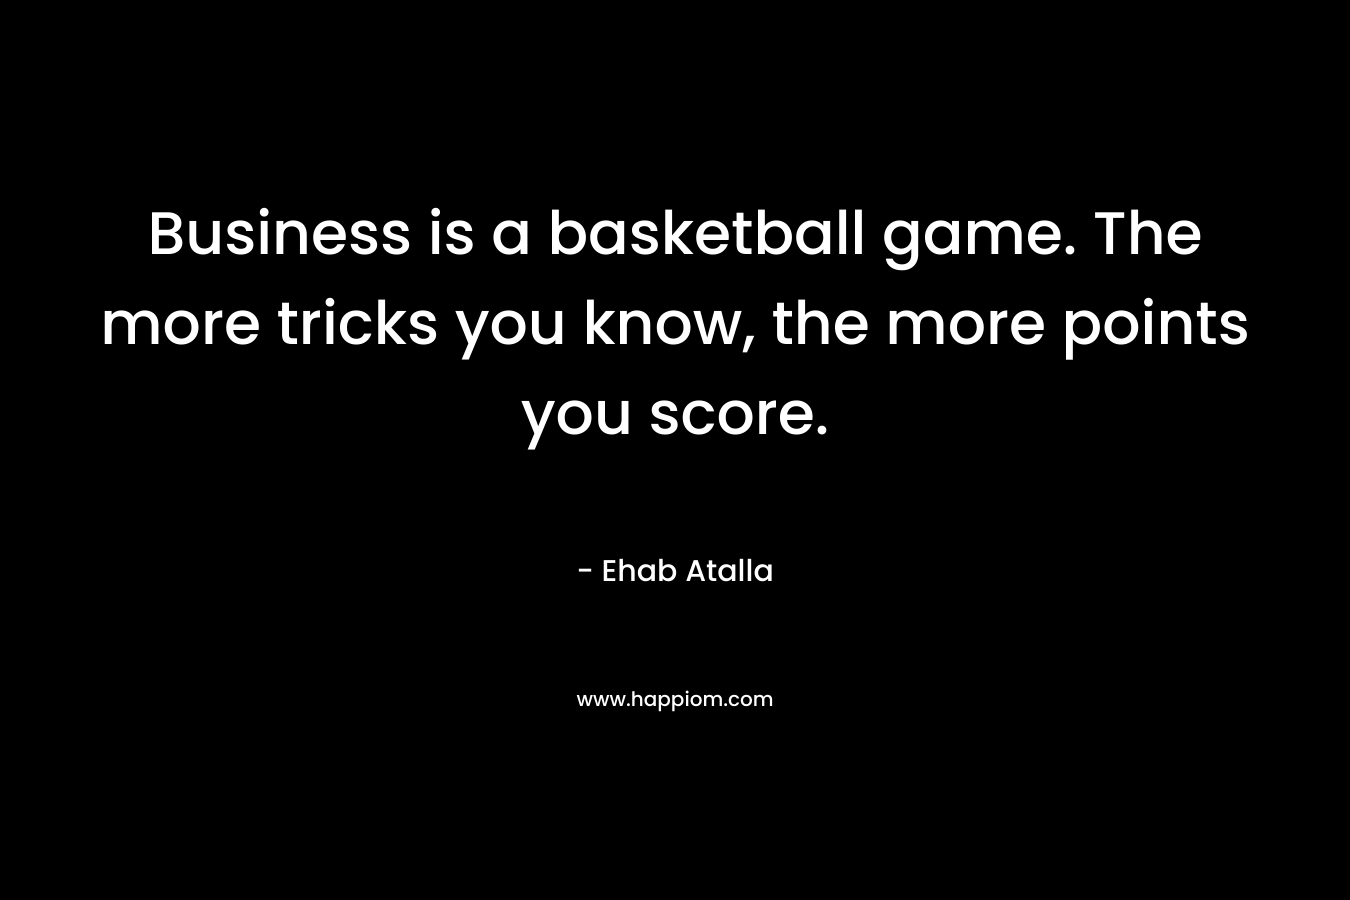 Business is a basketball game. The more tricks you know, the more points you score.